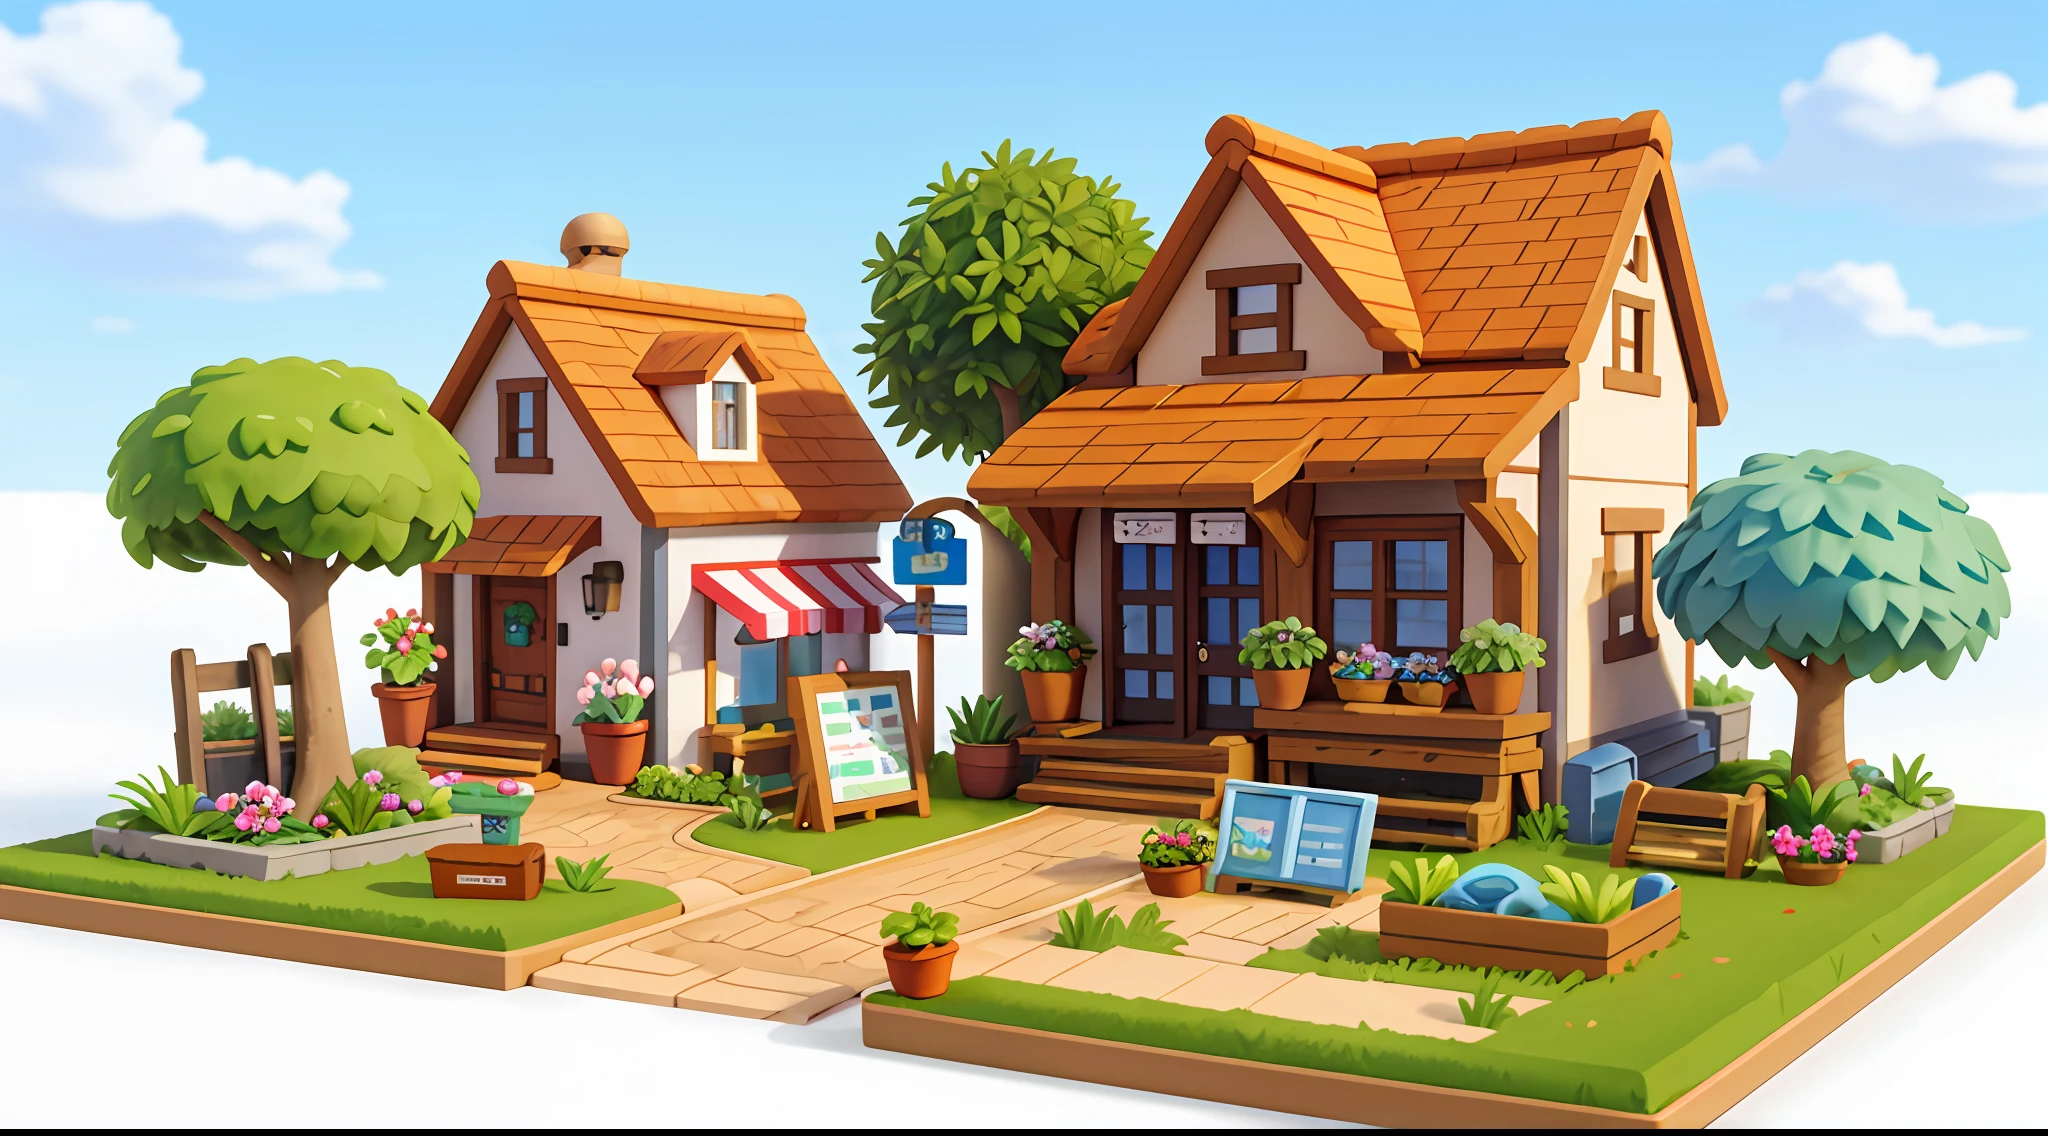 (Miniature cityscape), (Isometric:1), Cartoon style, (Sandbox game style), (White background), (superb detail), Florists, potted plants, flowers, grass, trees, shops, shops, signs, Lighting, Clear sky, Outdoors, Landscapes, Clouds, Sky,  Roads, Grass,, grass, 3D, 8k, HDR, high definition, film grain. Blue sky, white clouds, small trees, mailbox, stairs, clean background